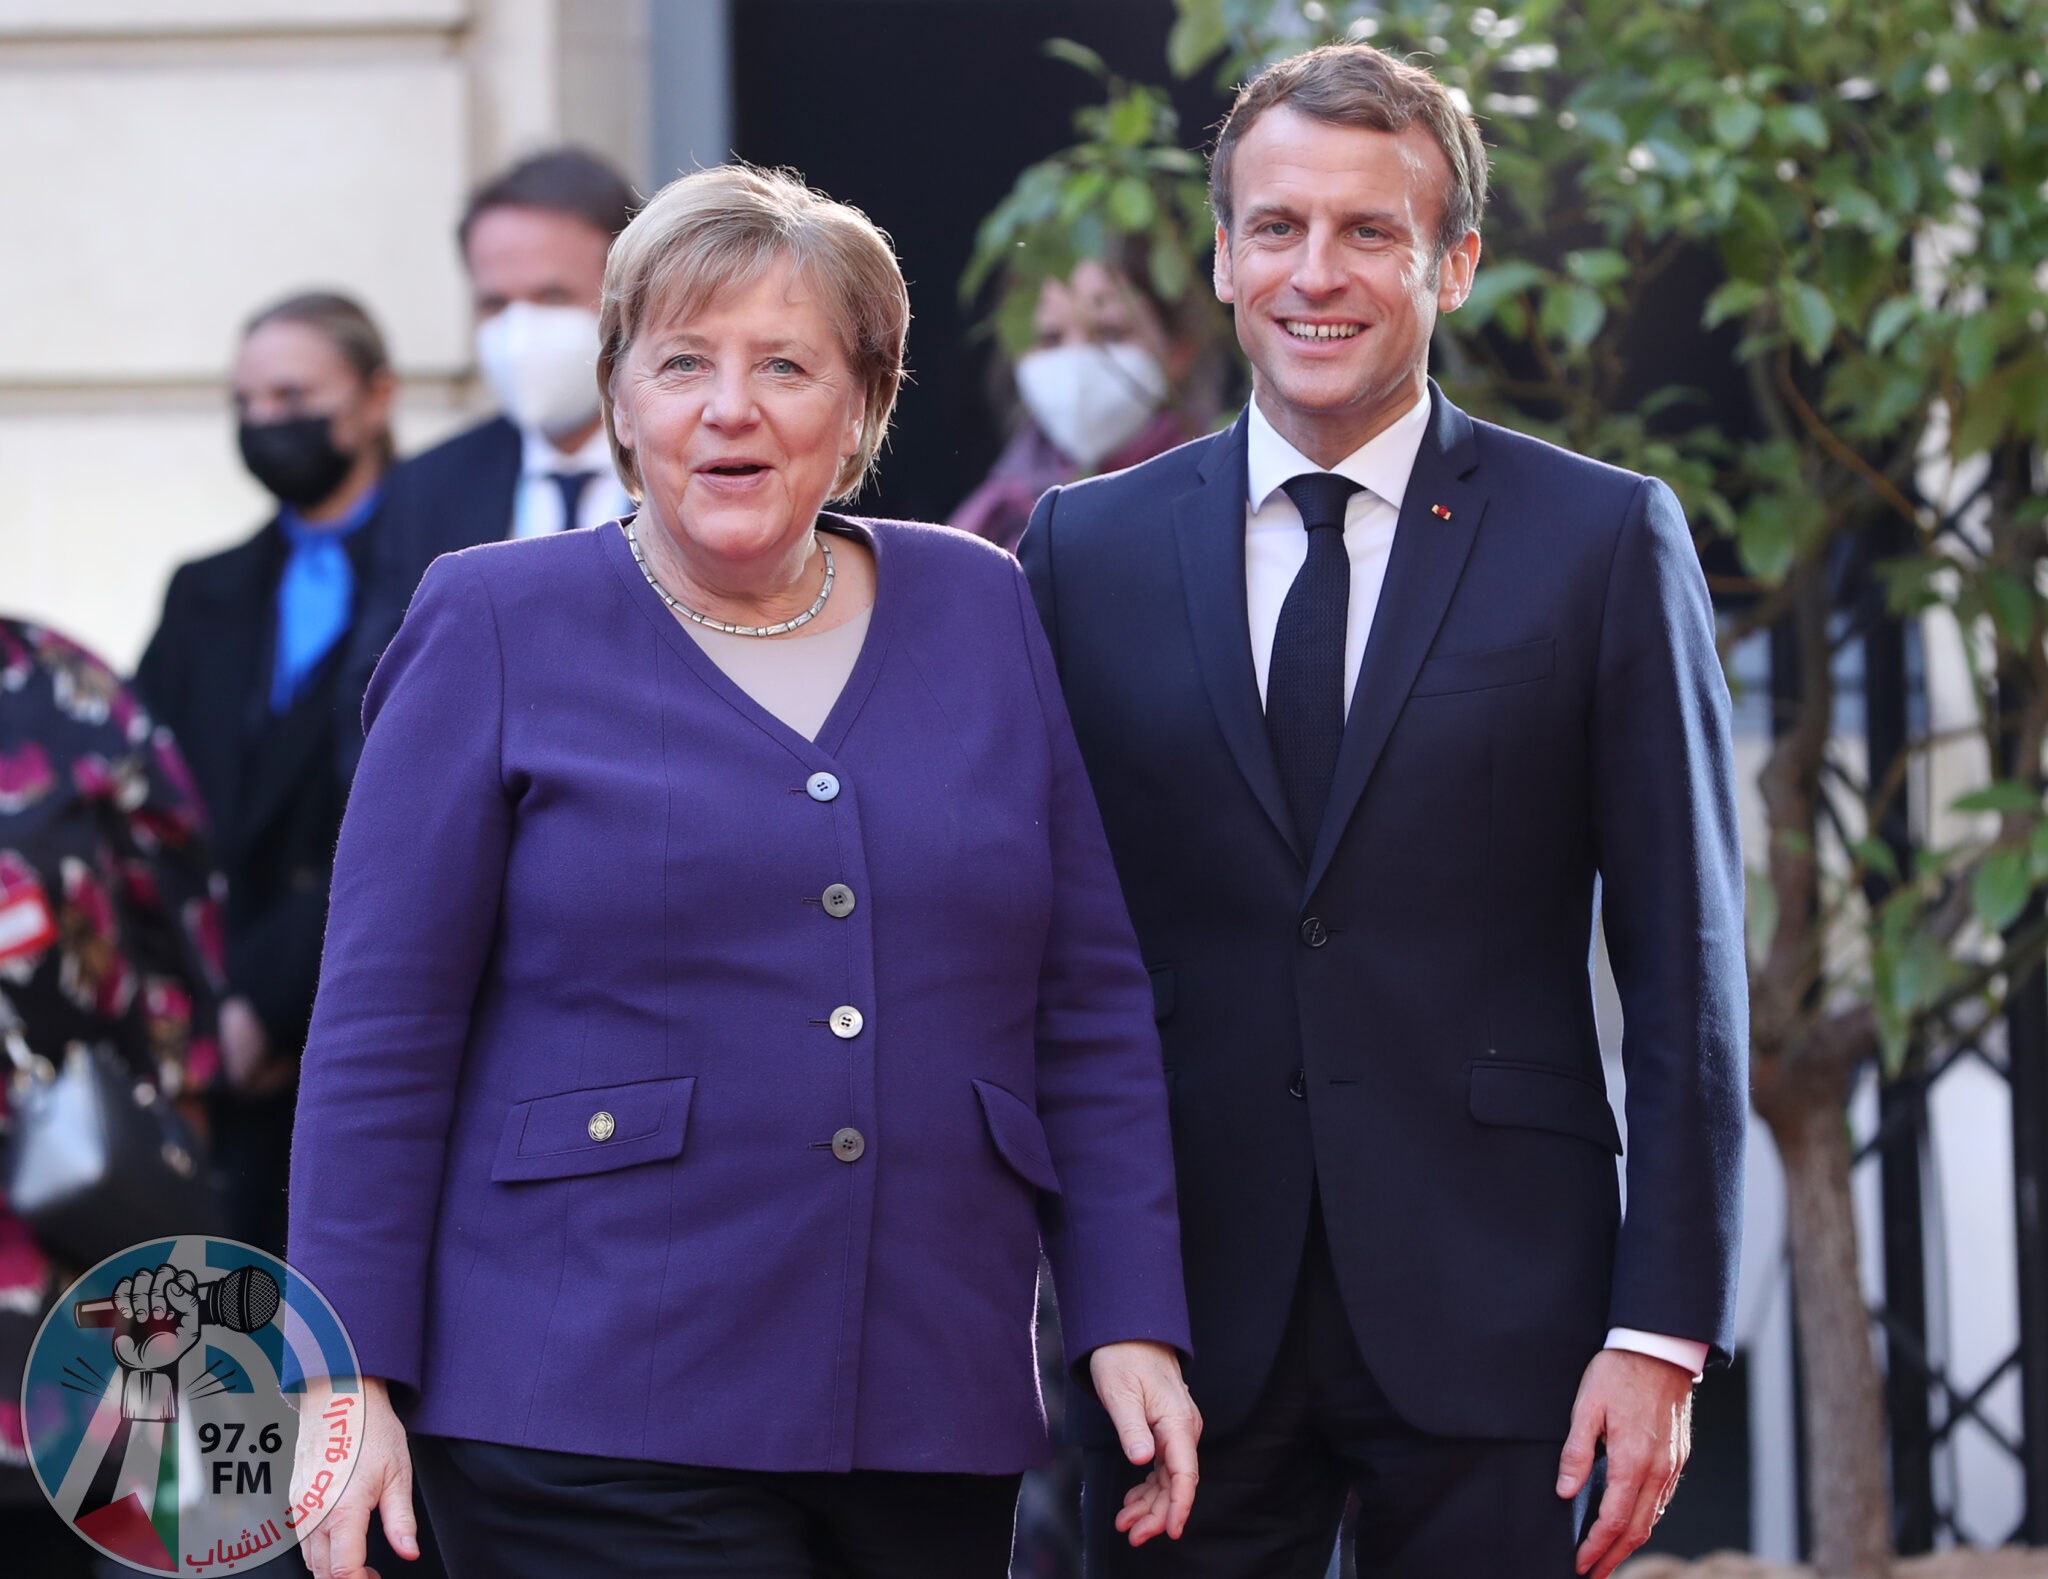 (211113) -- PARIS, Nov. 13, 2021 (Xinhua) -- French President Emmanuel Macron (R) welcomes German Chancellor Angela Merkel ahead of the Paris International Conference for Libya in Paris, France, Nov. 12, 2021. Participants in the Paris International Conference for Libya, chaired Friday by France, called for the holding of free, fair, inclusive and credible presidential and parliamentary elections on Dec. 24 in Libya as scheduled. (Xinhua/Gao Jing)